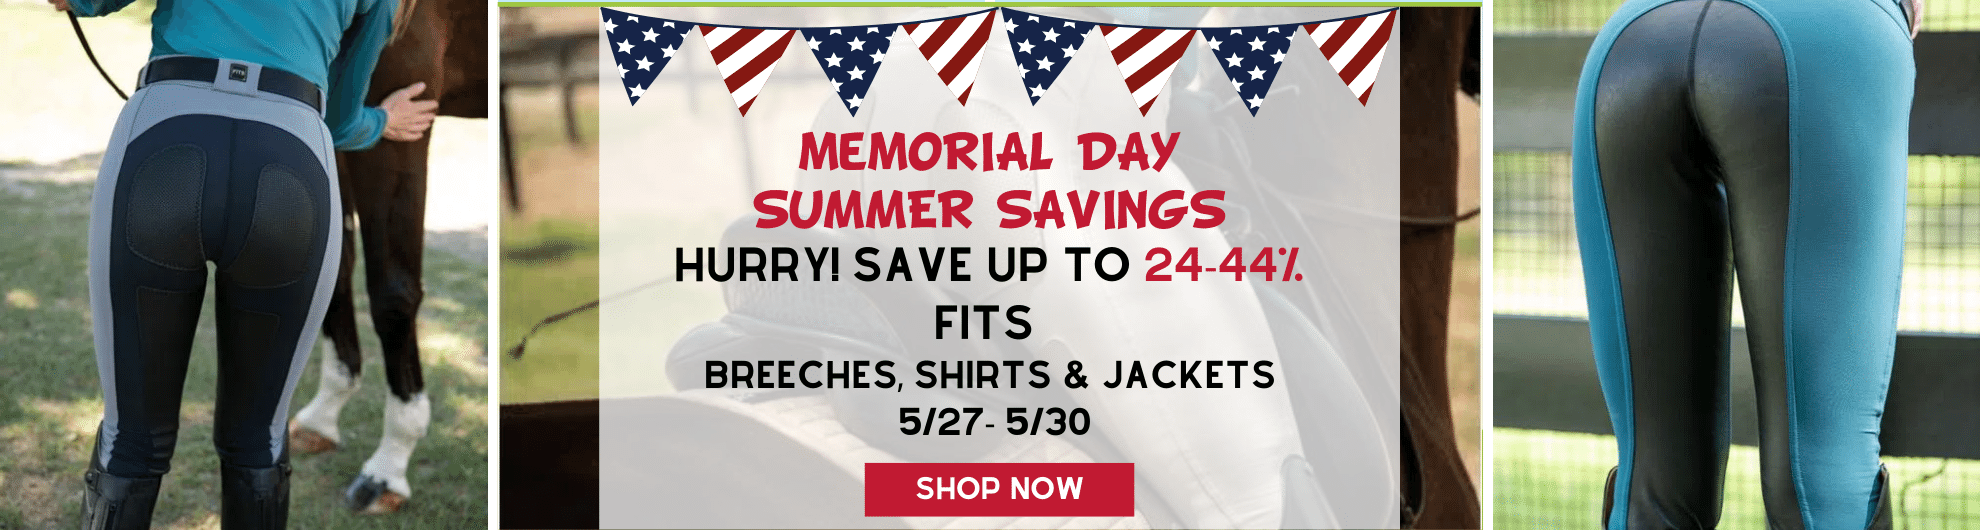 Memorial Day Sale - FITS